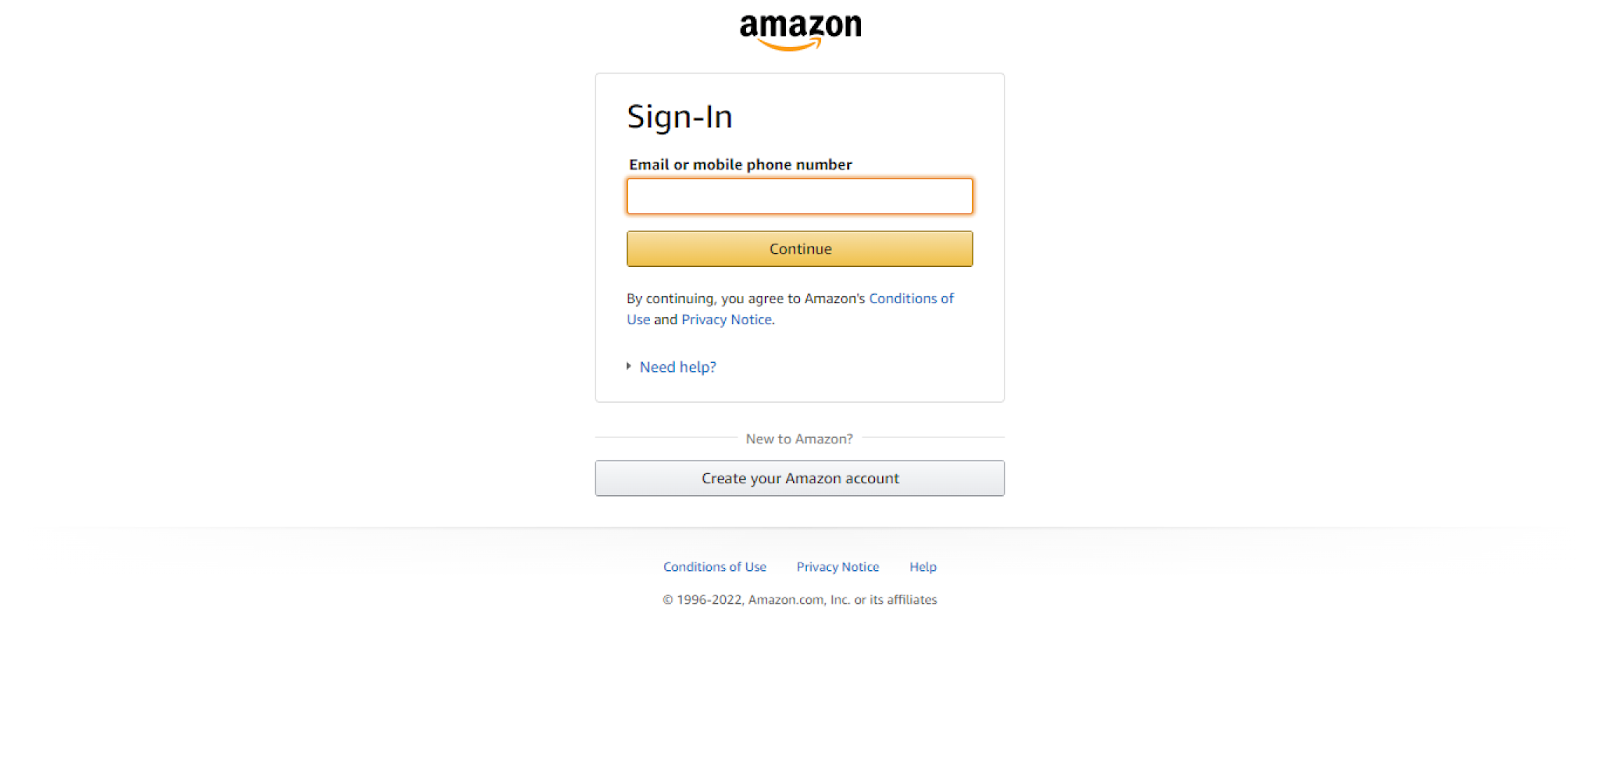 How to log out of Amazon on Desktop?